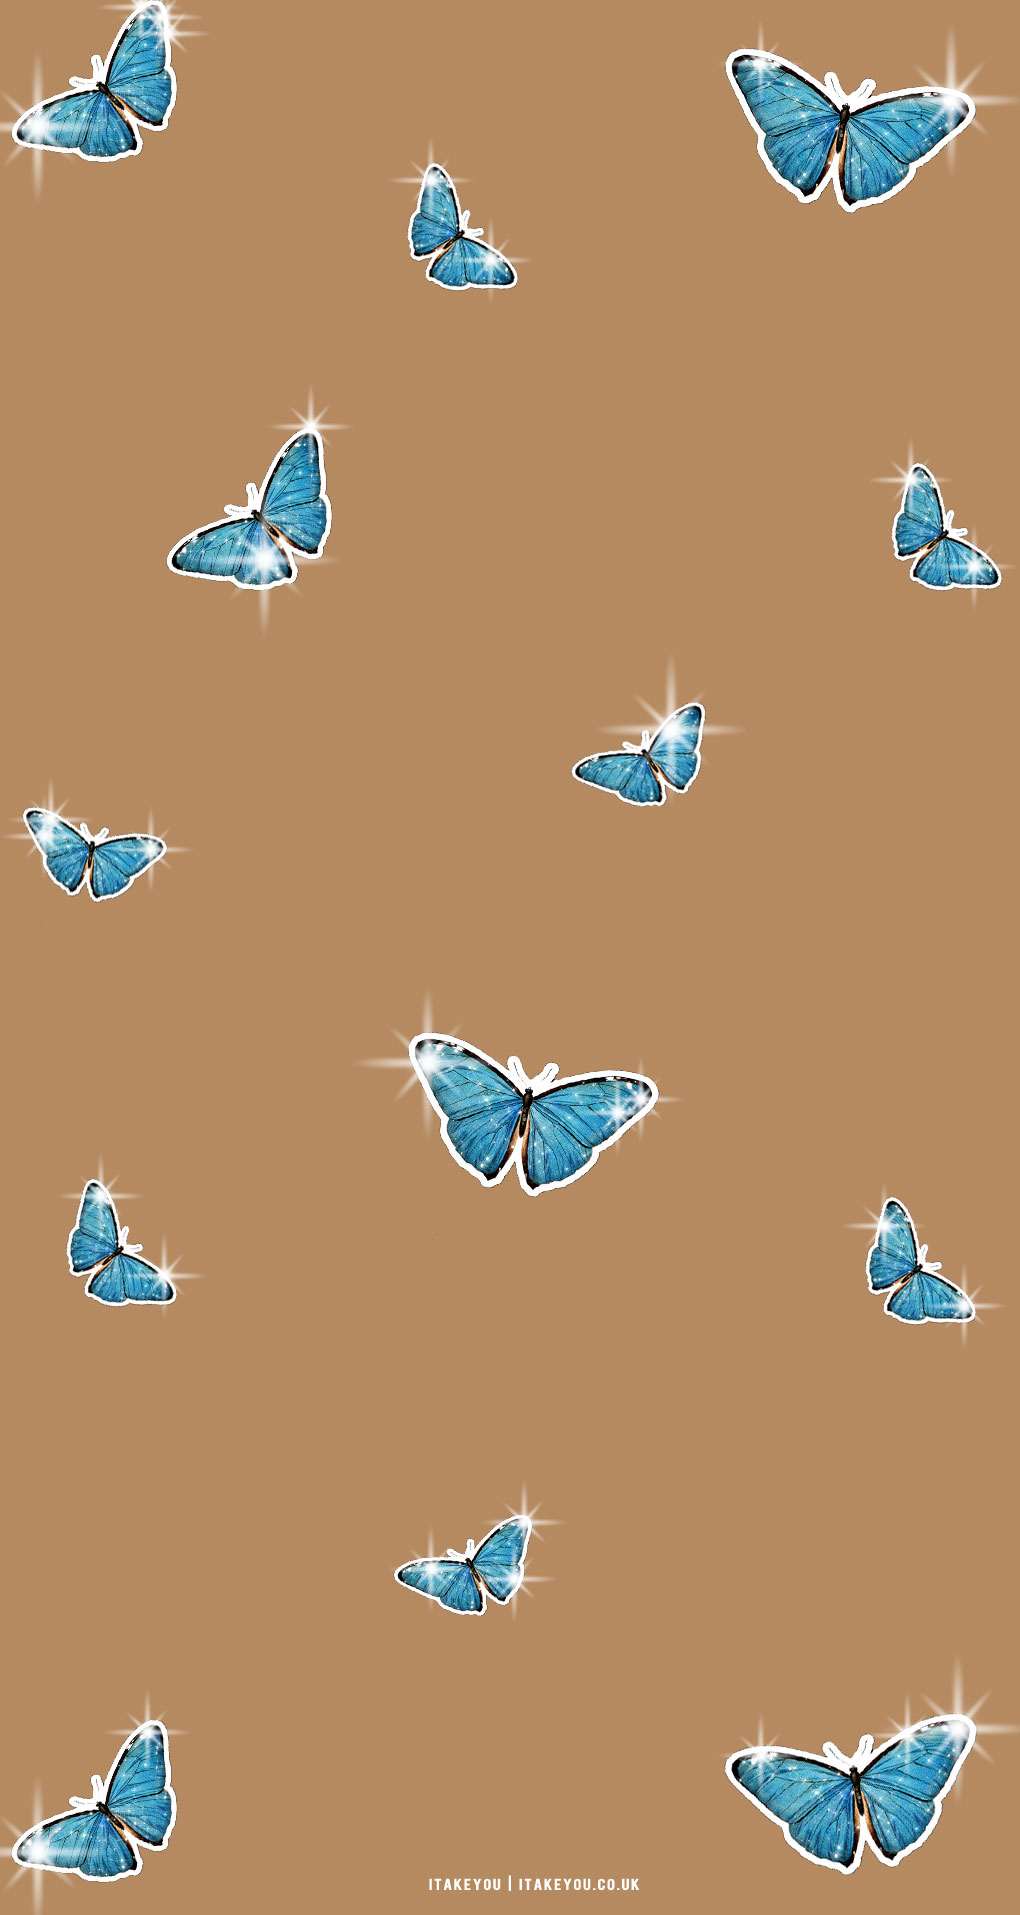 Cute Brown Aesthetic Wallpaper for Phone, Shiny Blue Butterflies I Take You. Wedding Readings. Wedding Ideas